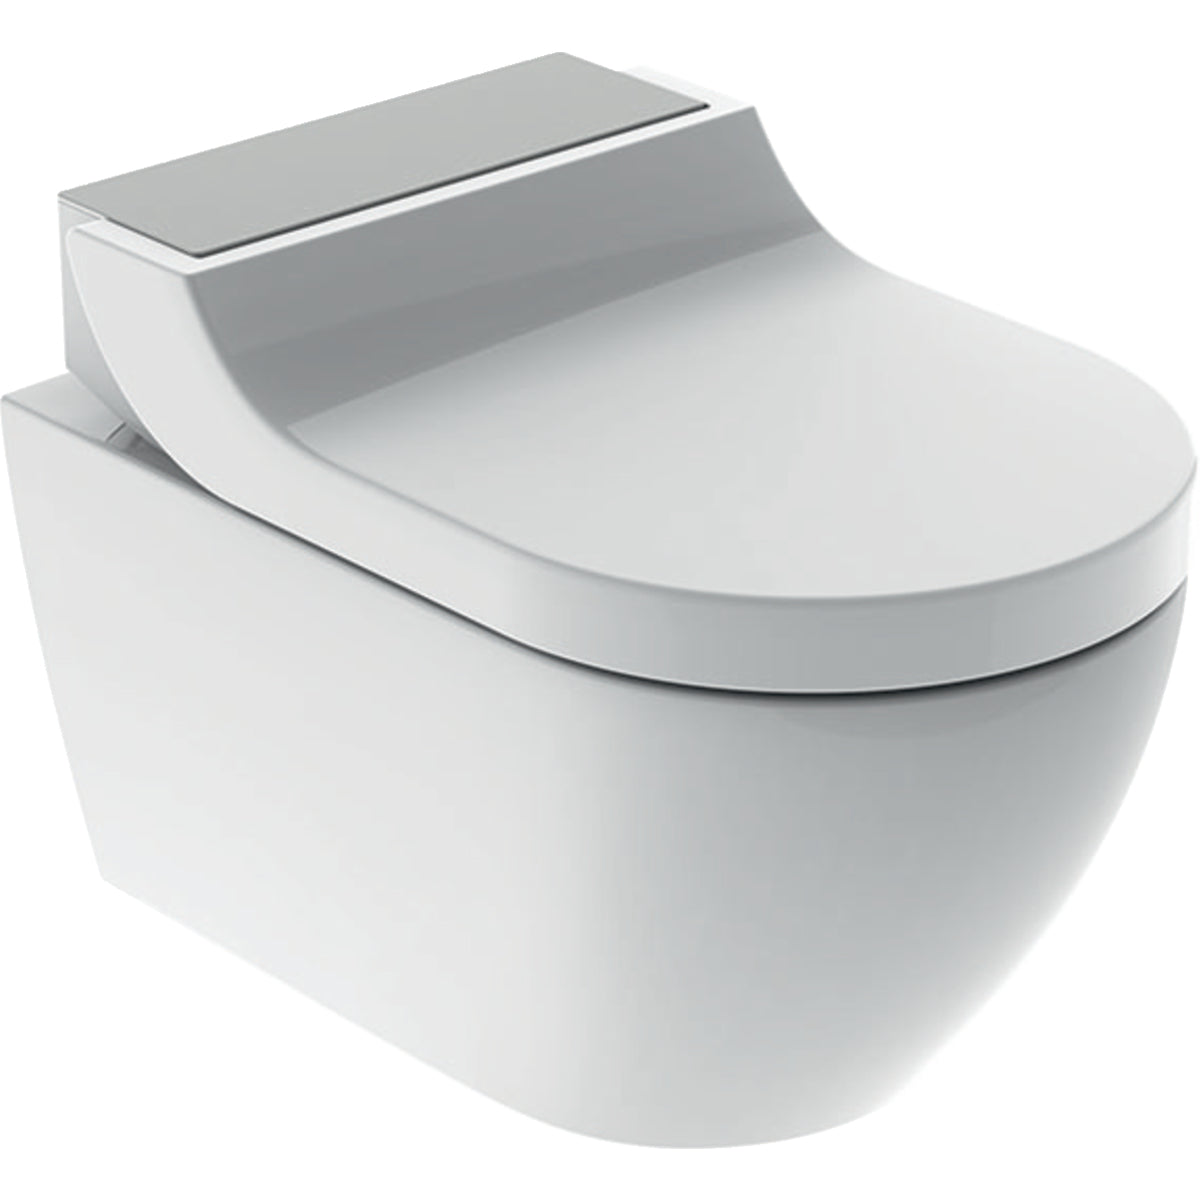 Geberit AquaClean Tuma Comfort Rimless Wall Mounted Shower WC Pan With Soft Close Toilet Seat